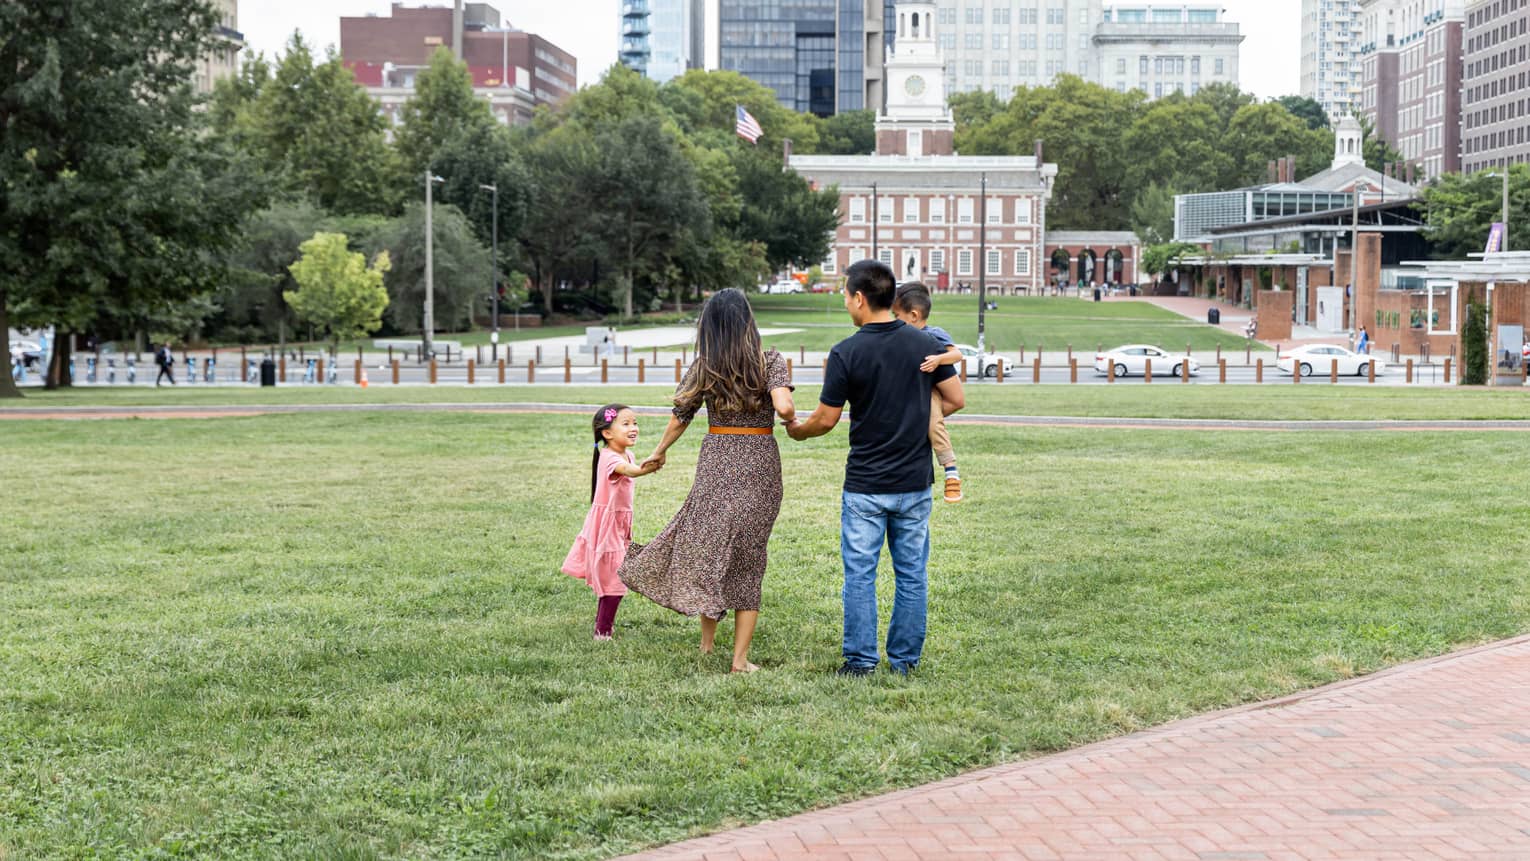 A family of four standing in a park in a city.